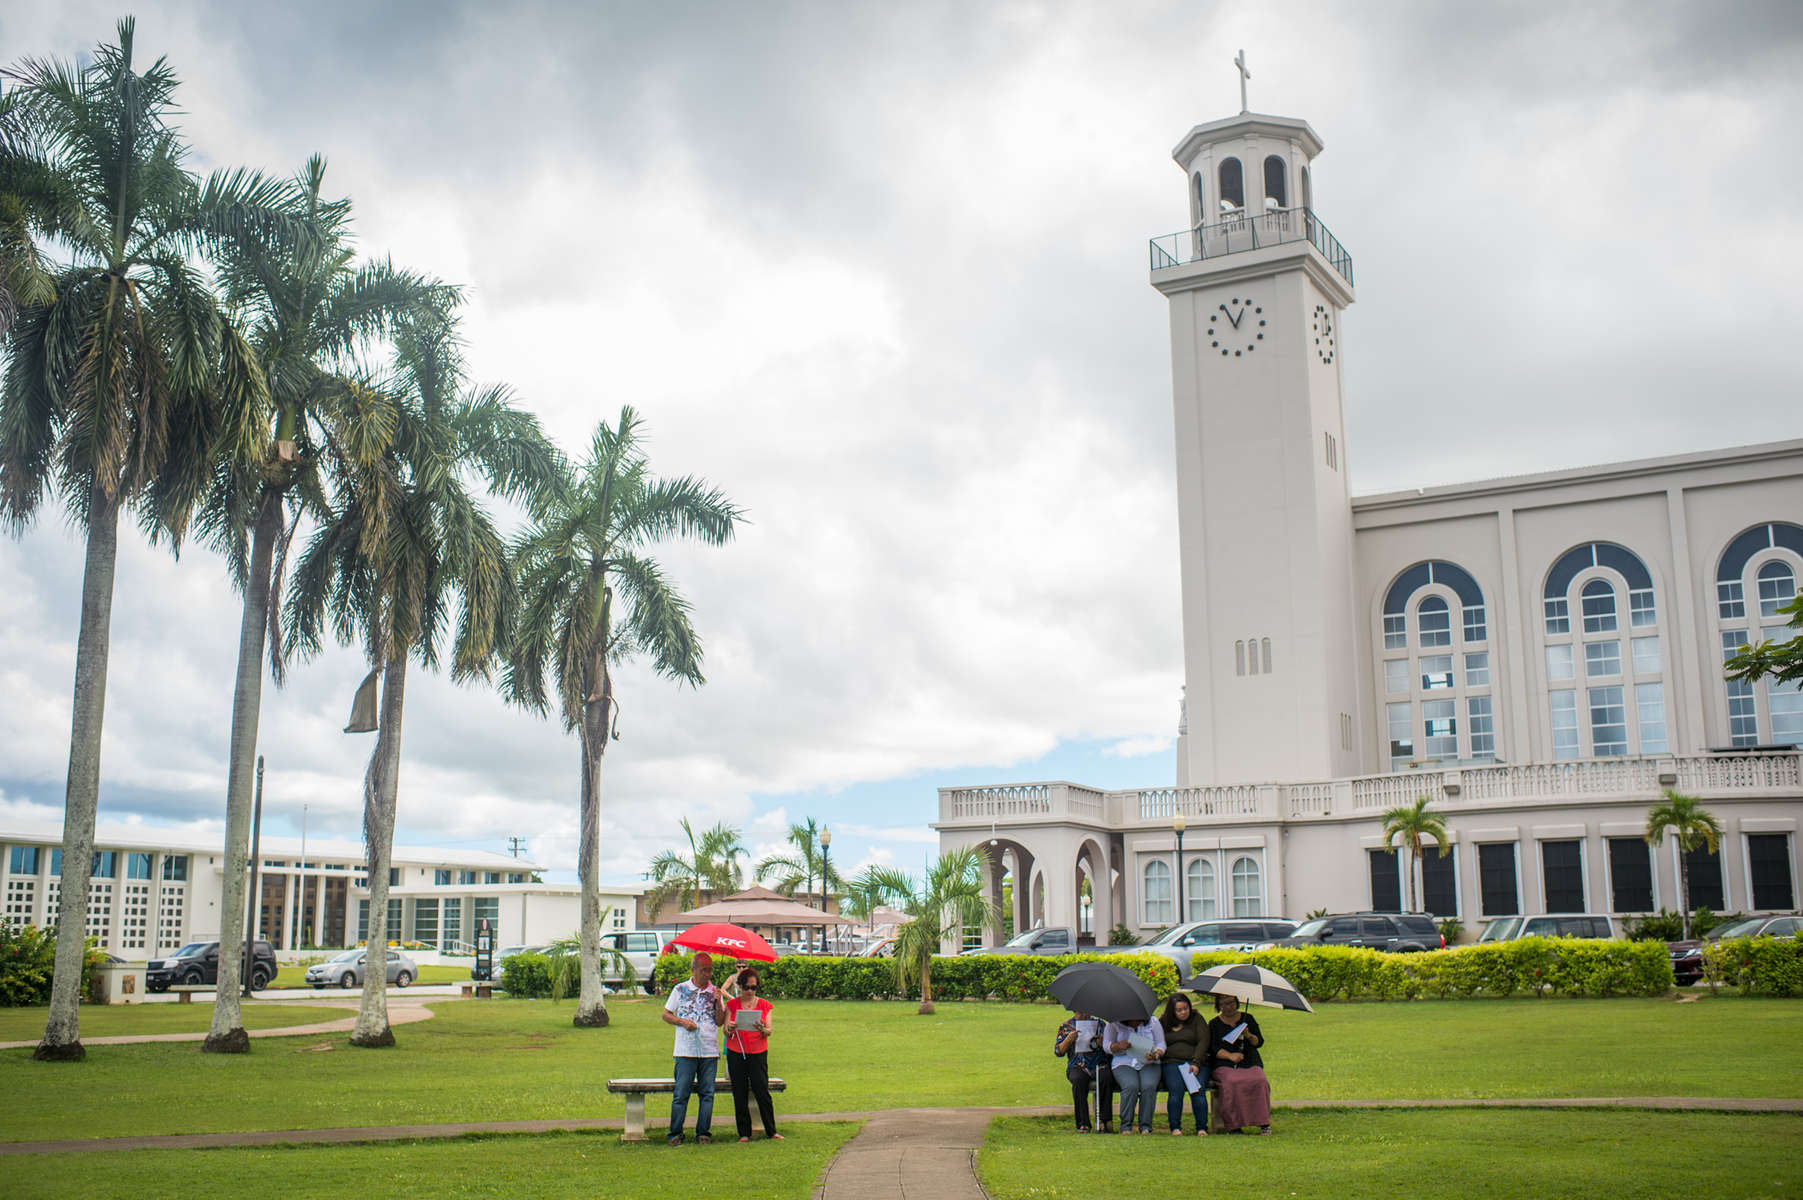 North Korean threat or no threat, life continues as usual on Guam. On Sunday, locals gathered at the Plaza De Espana in Agana for a rosary rally in honor of the 100th Anniversary of Our Lady of Fatima. (Aug 13, 2017)Photo by Nancy Borowick